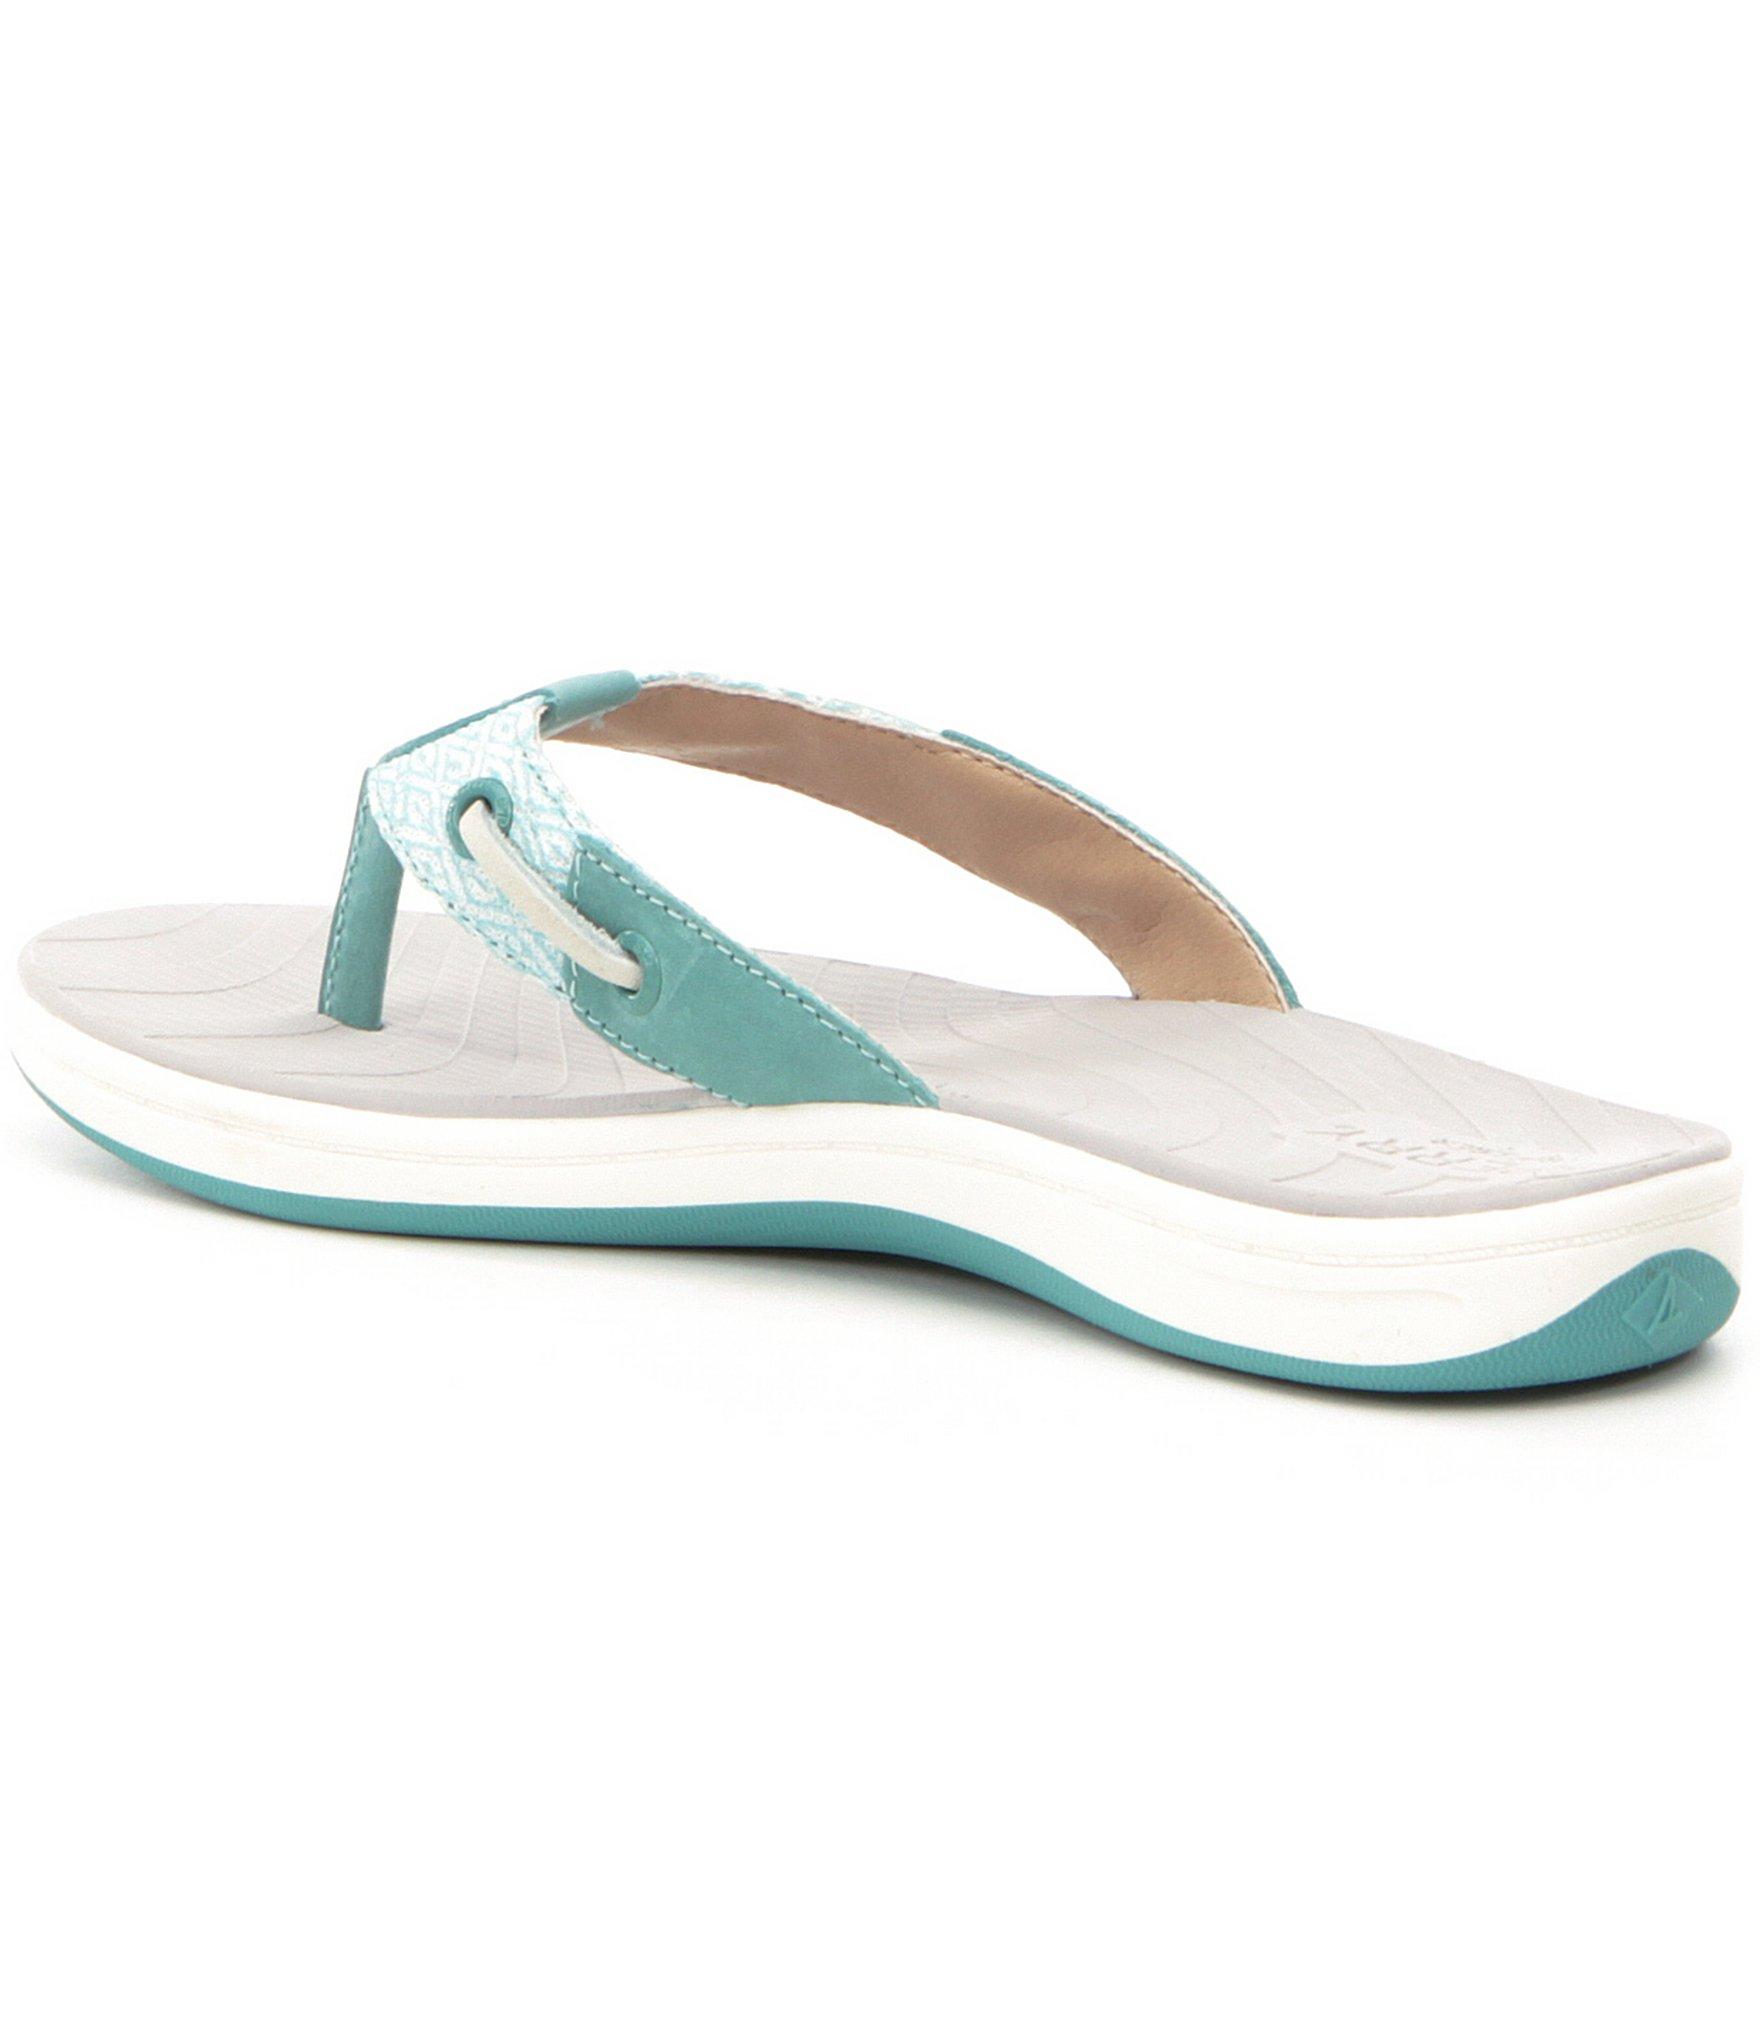 Sperry Top-Sider Leather Seabrook Surf Mesh Flip Flops in Blue - Lyst